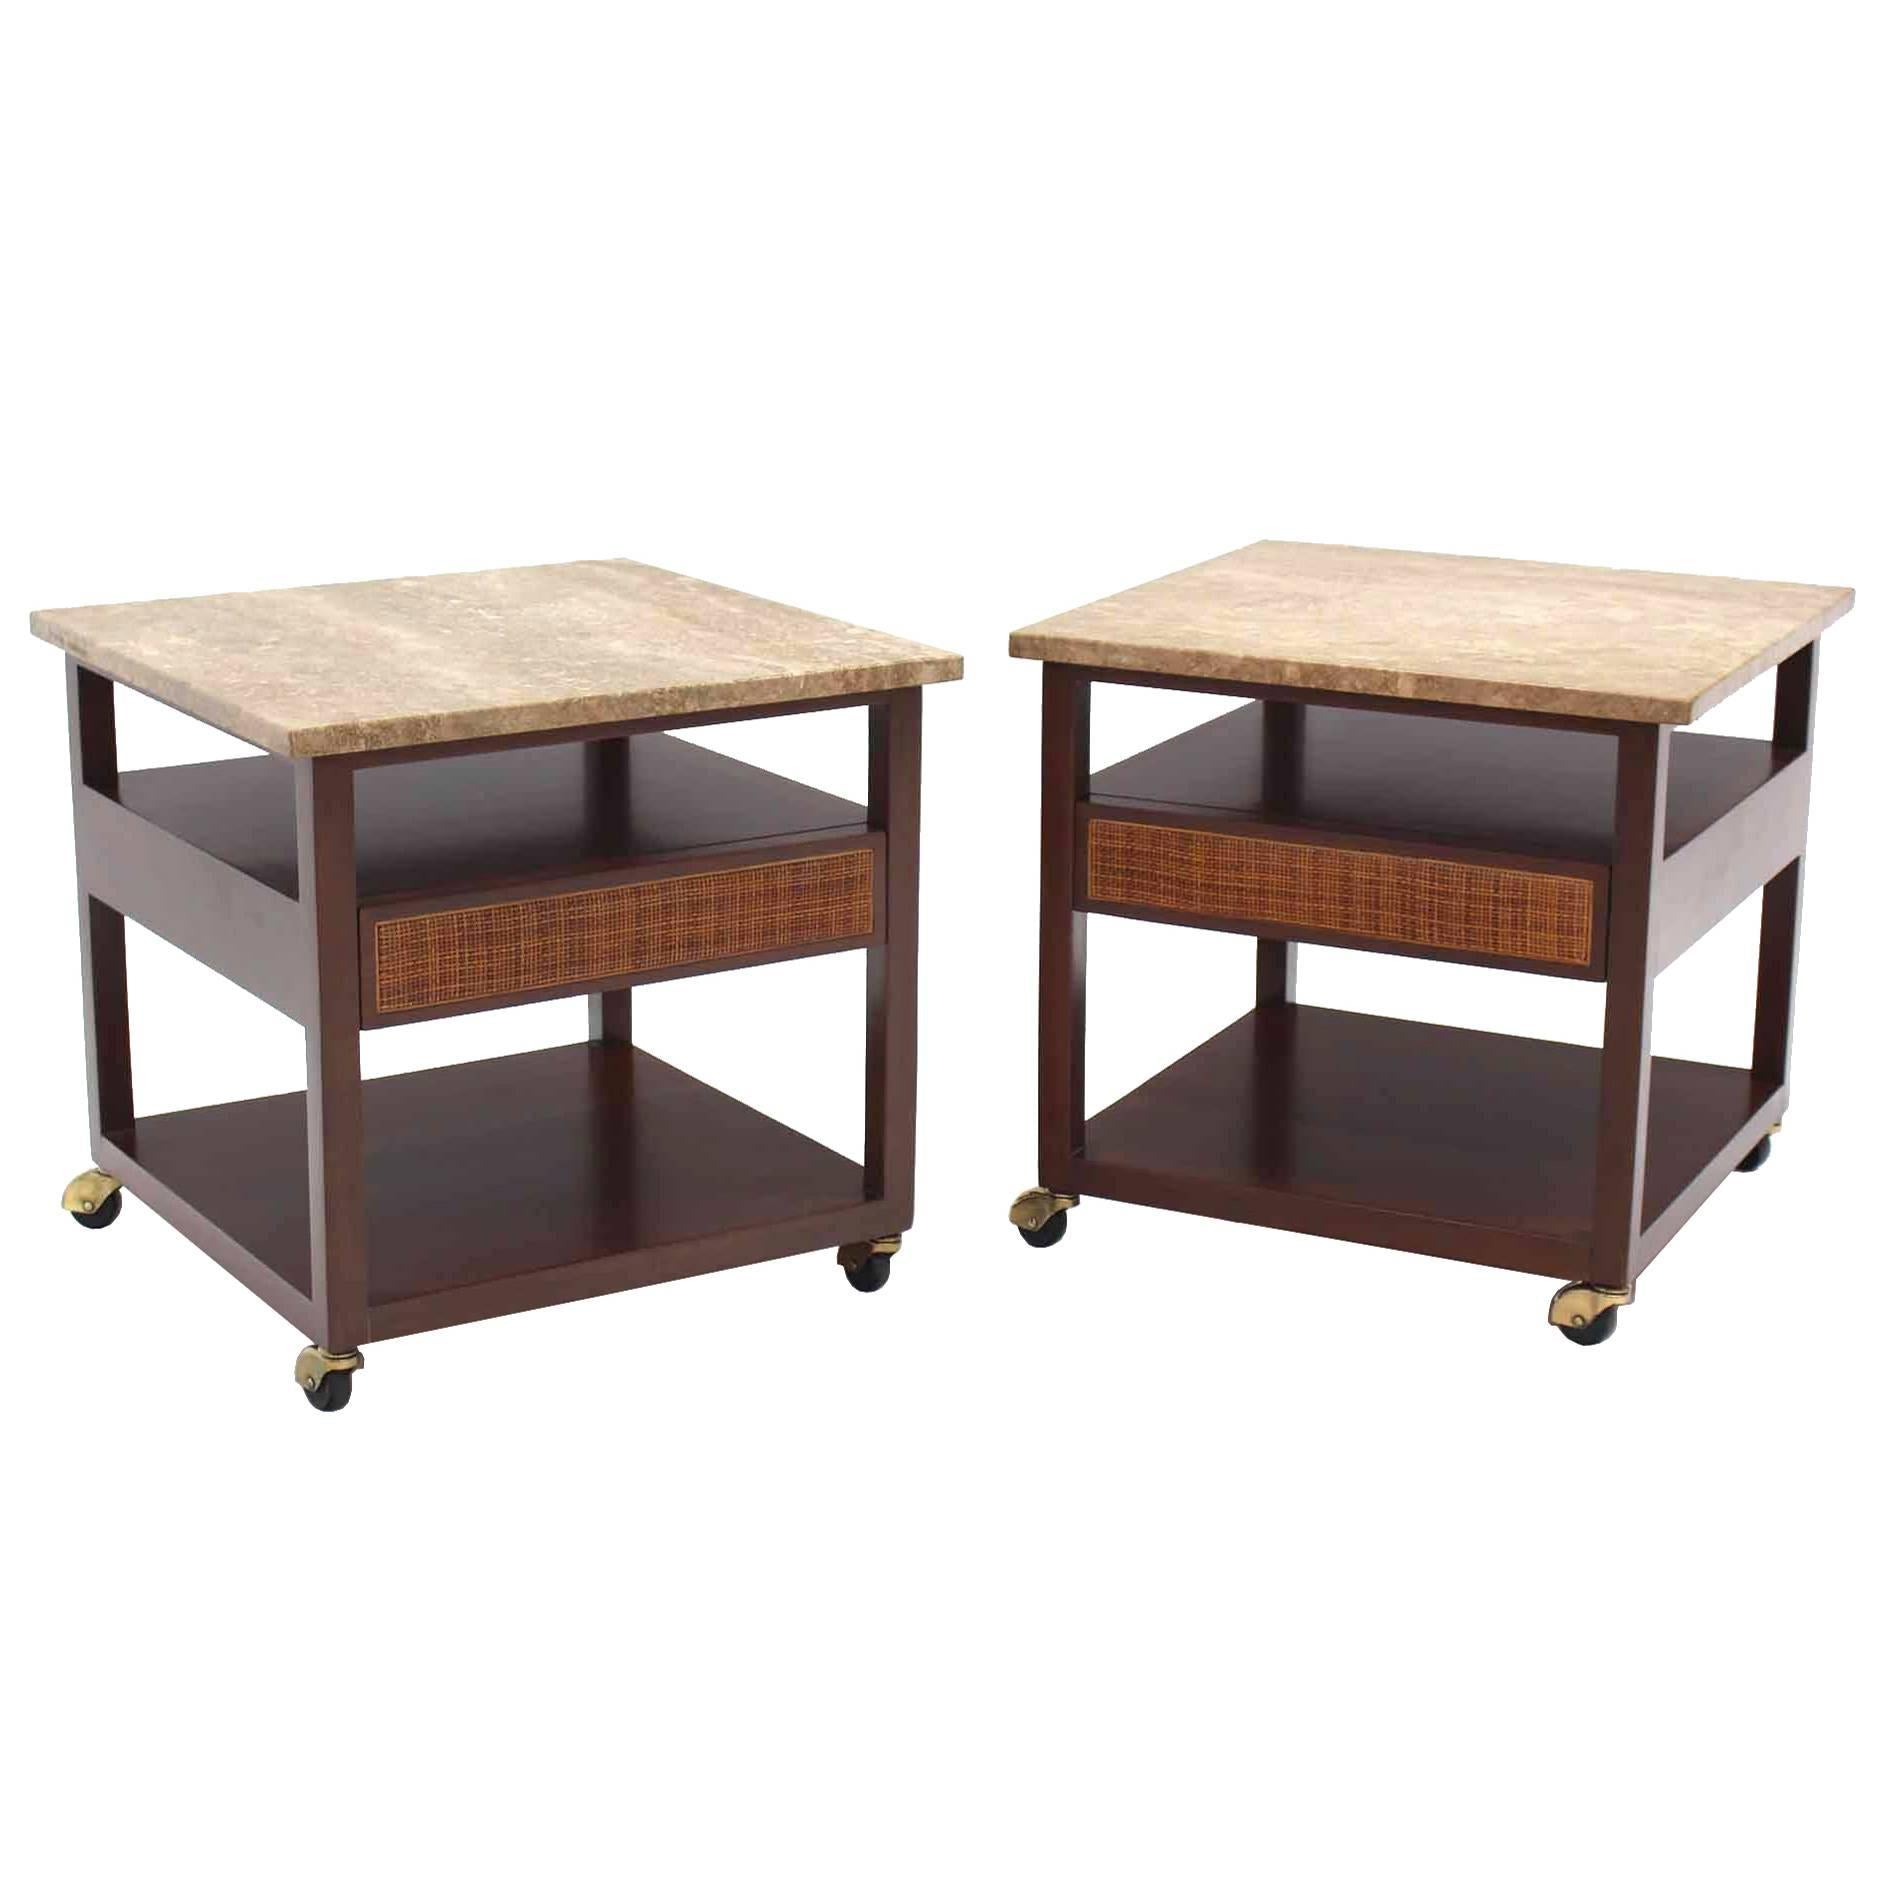 Pair of Marble-Top Single Drawer End Table by Harvey Probber